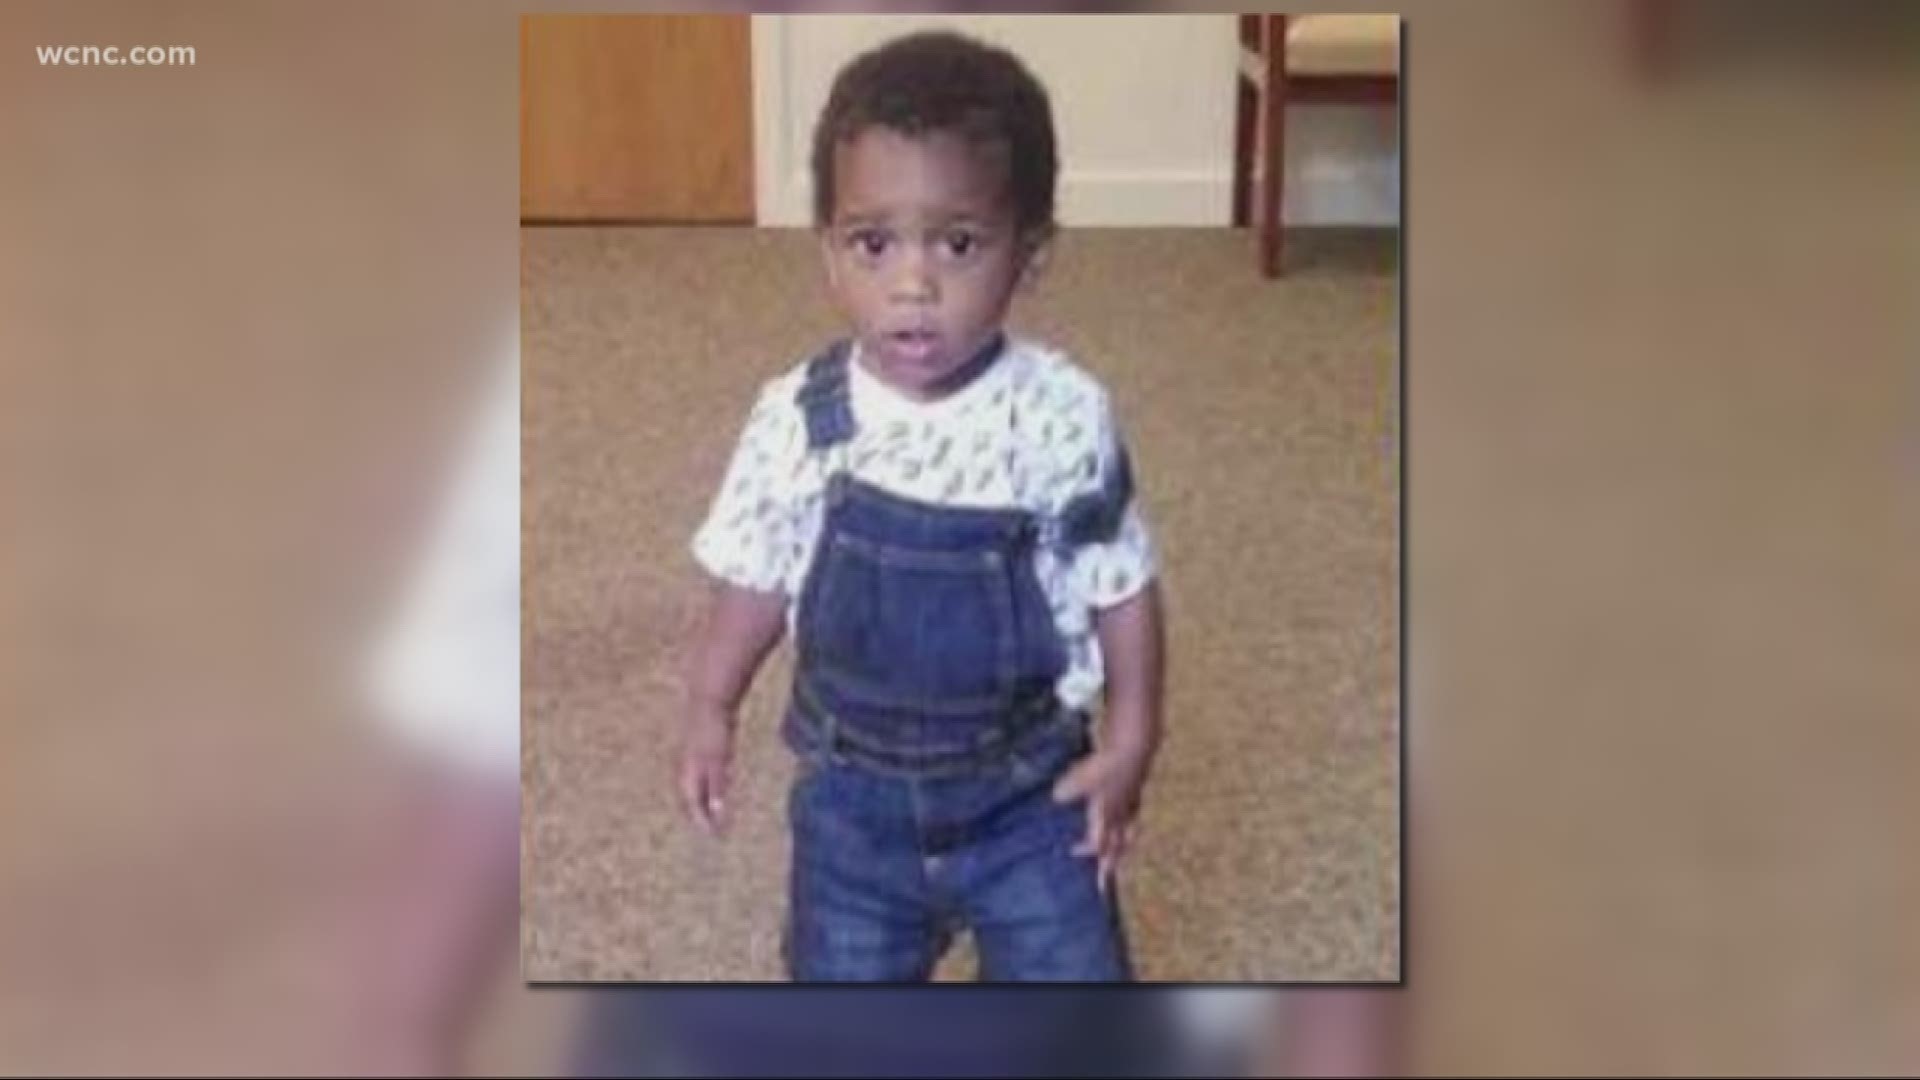 High Point Police canceled the Amber Alert for 1-year-old Legend Goodwine after he was found safe in Davidson County. The suspect accused of taking Goodwine and stealing a vehicle with him inside is still on the run.